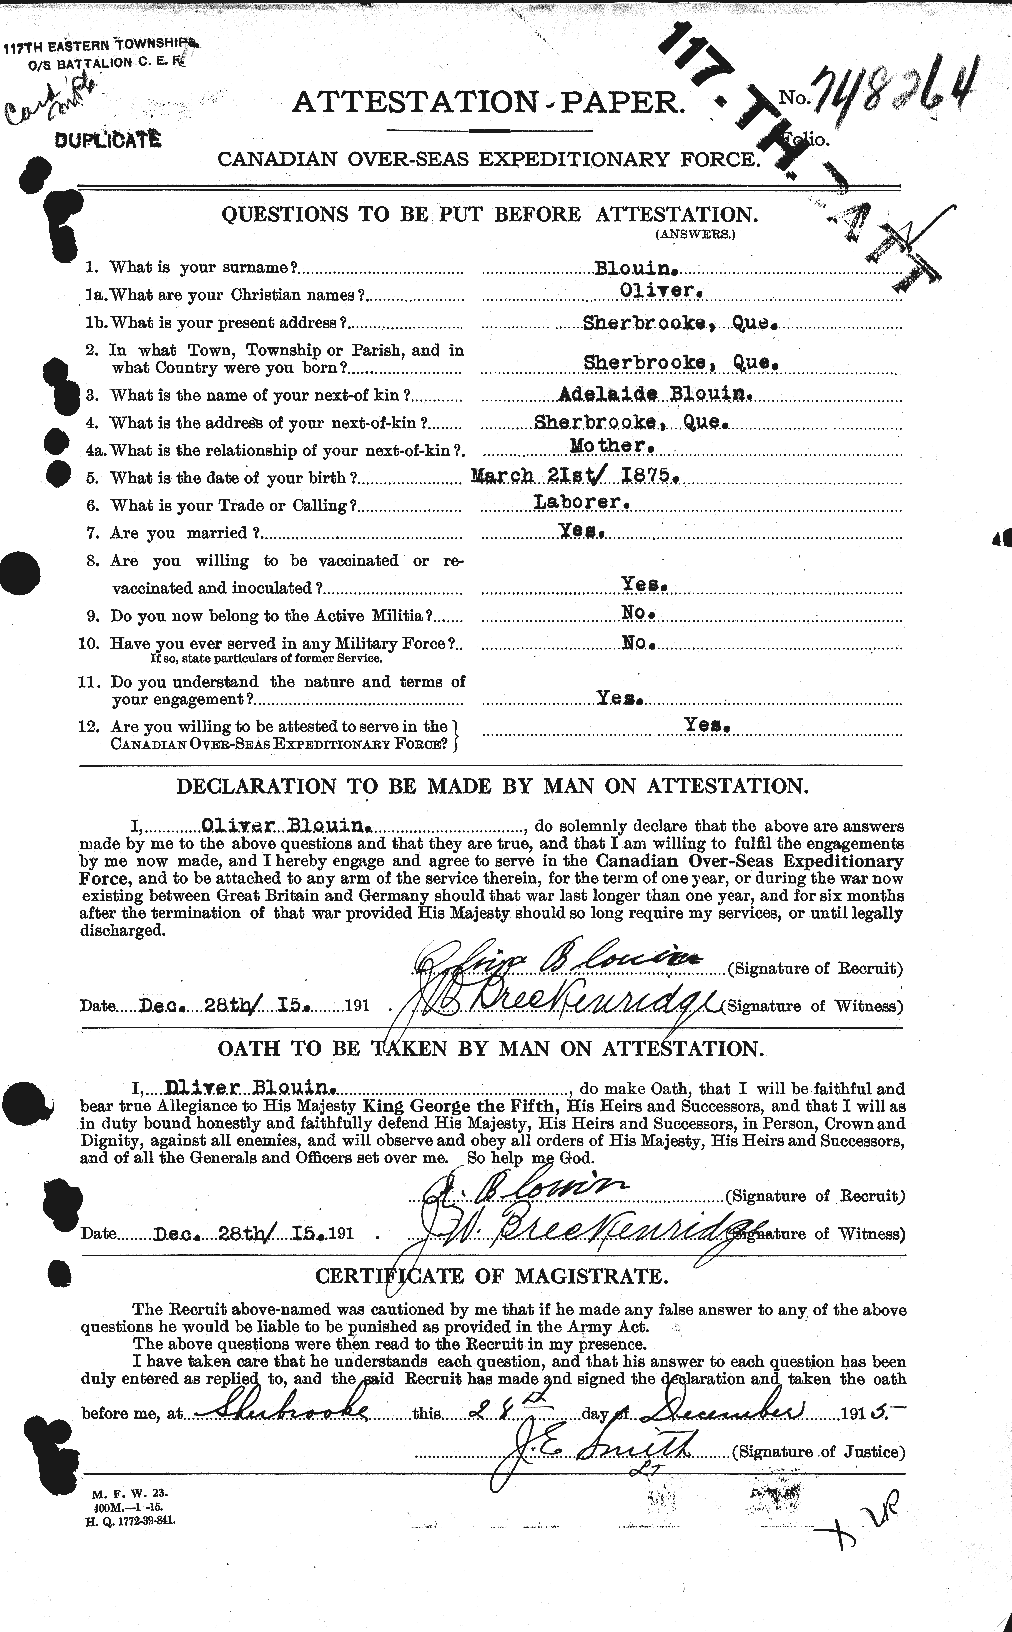 Personnel Records of the First World War - CEF 247405a